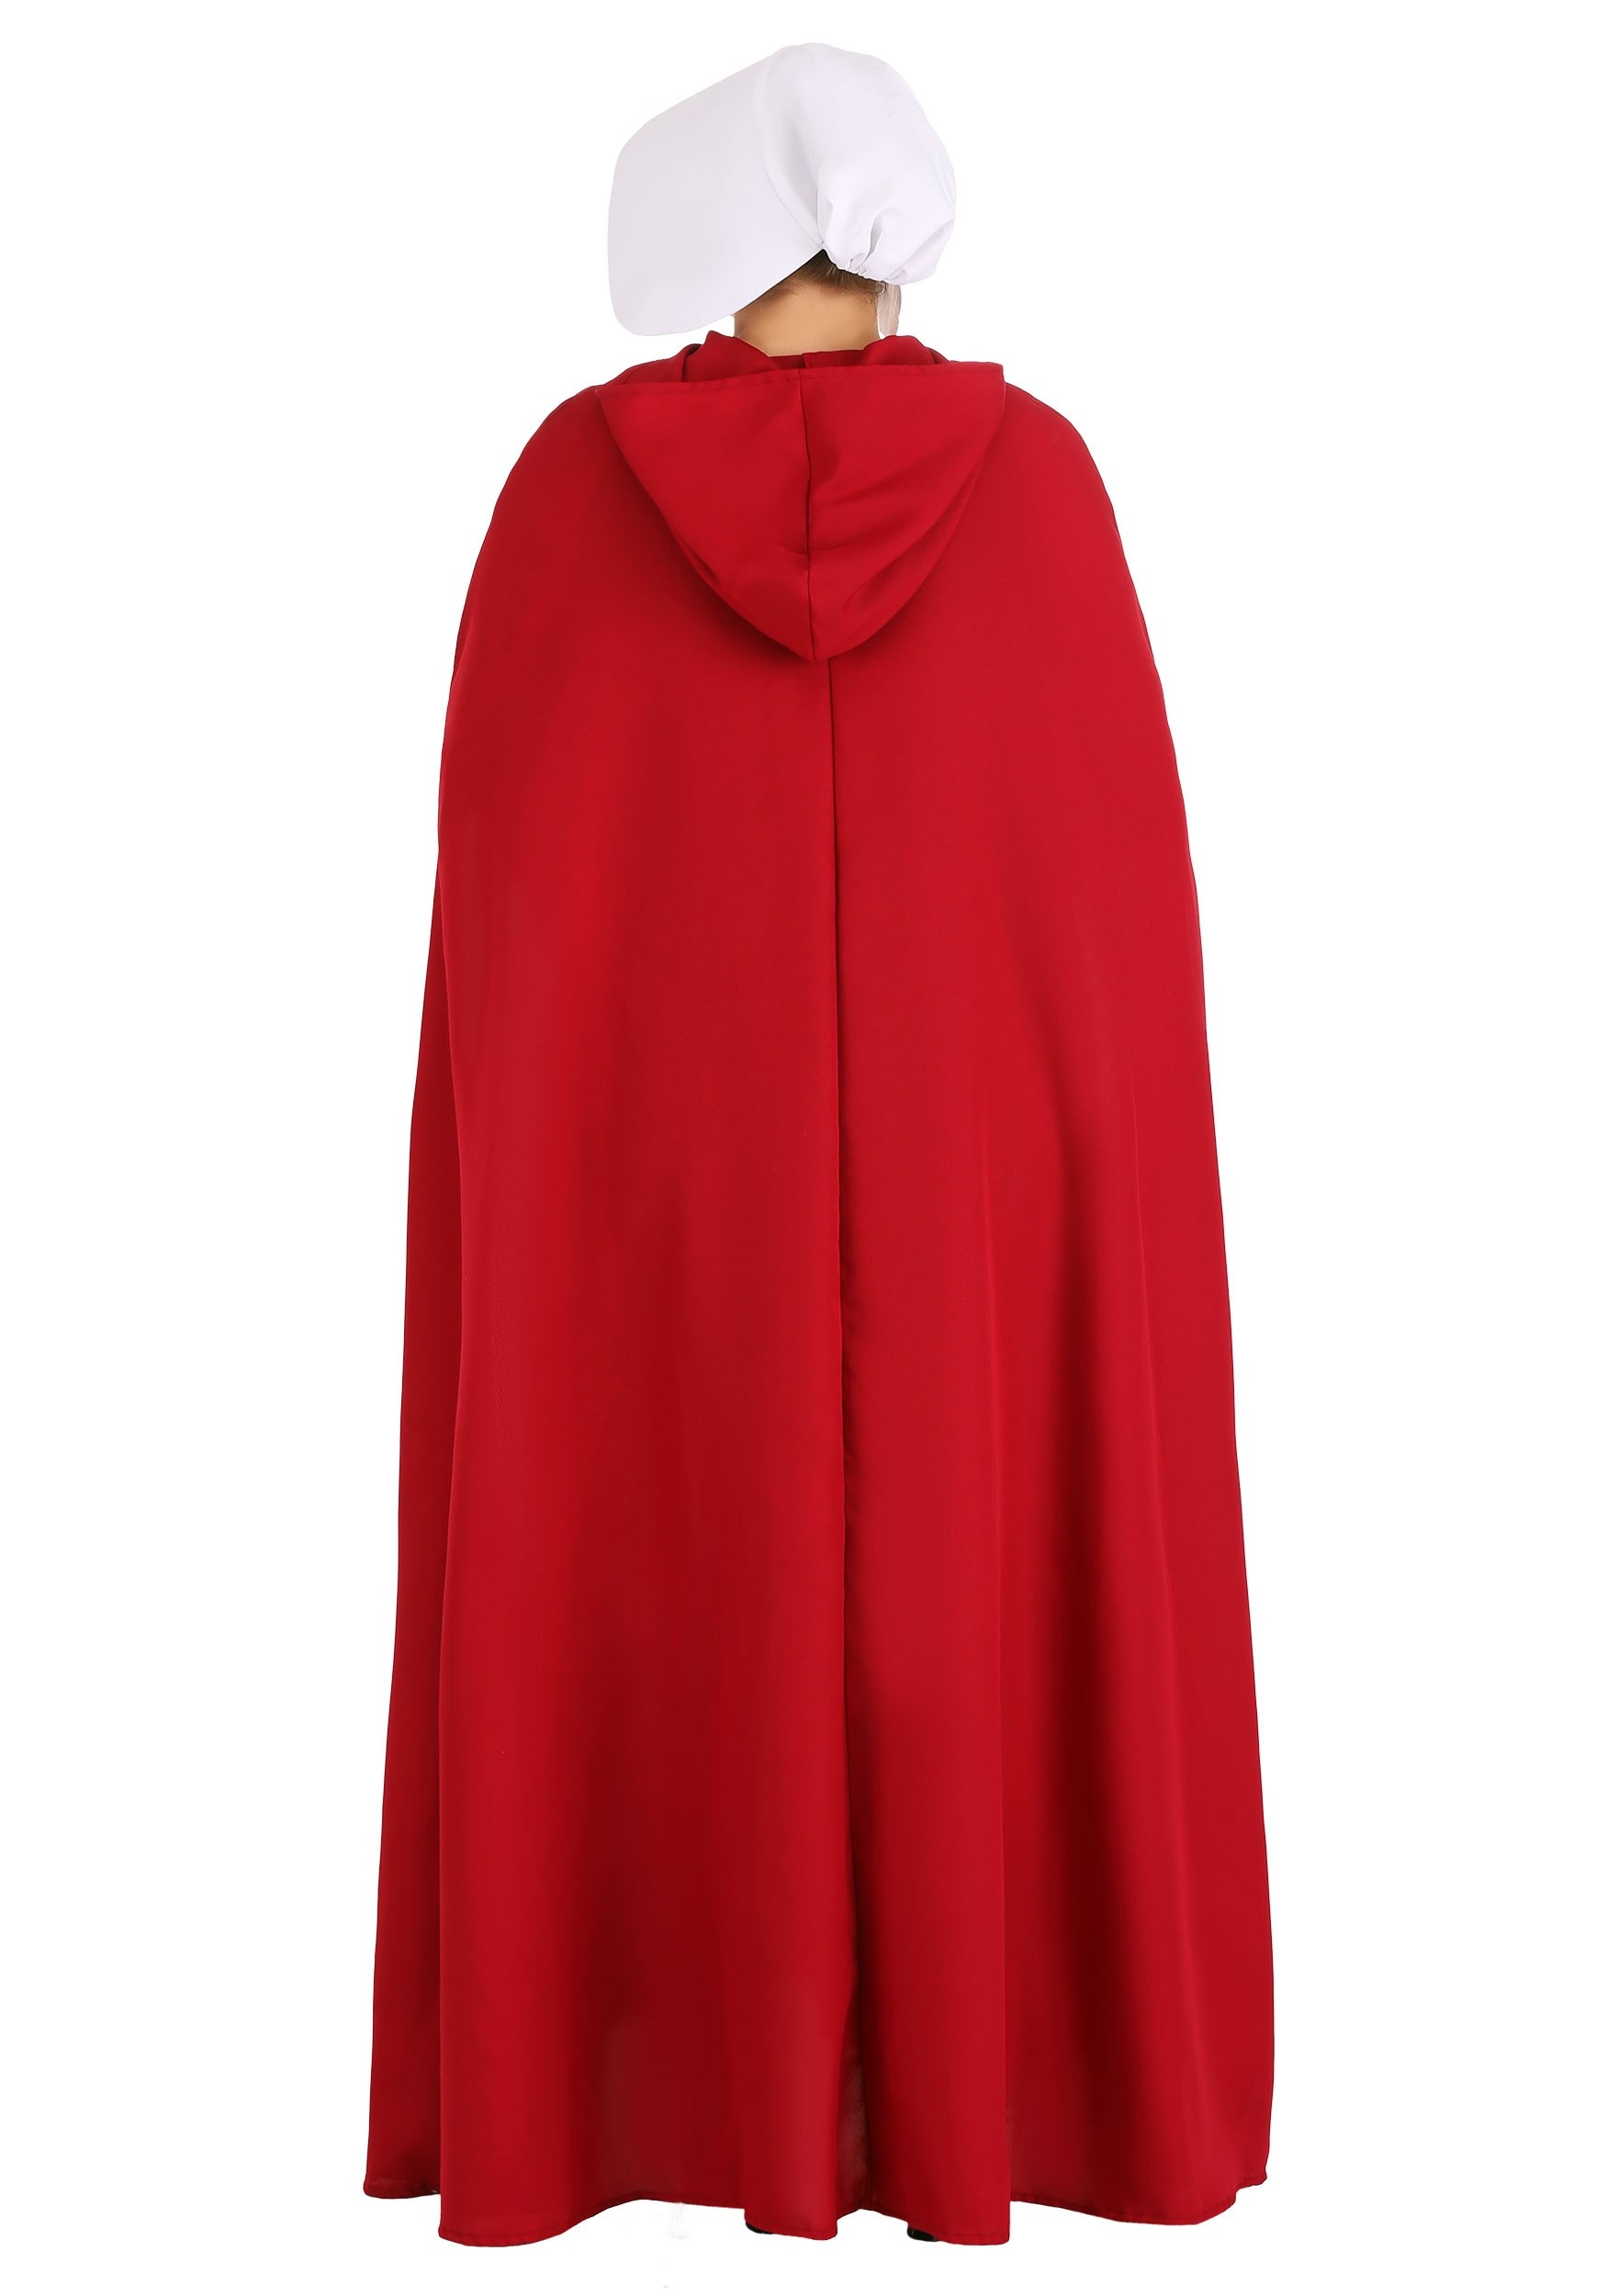 Plus Size Handmaid's Tale Costume for Women | Exclusive